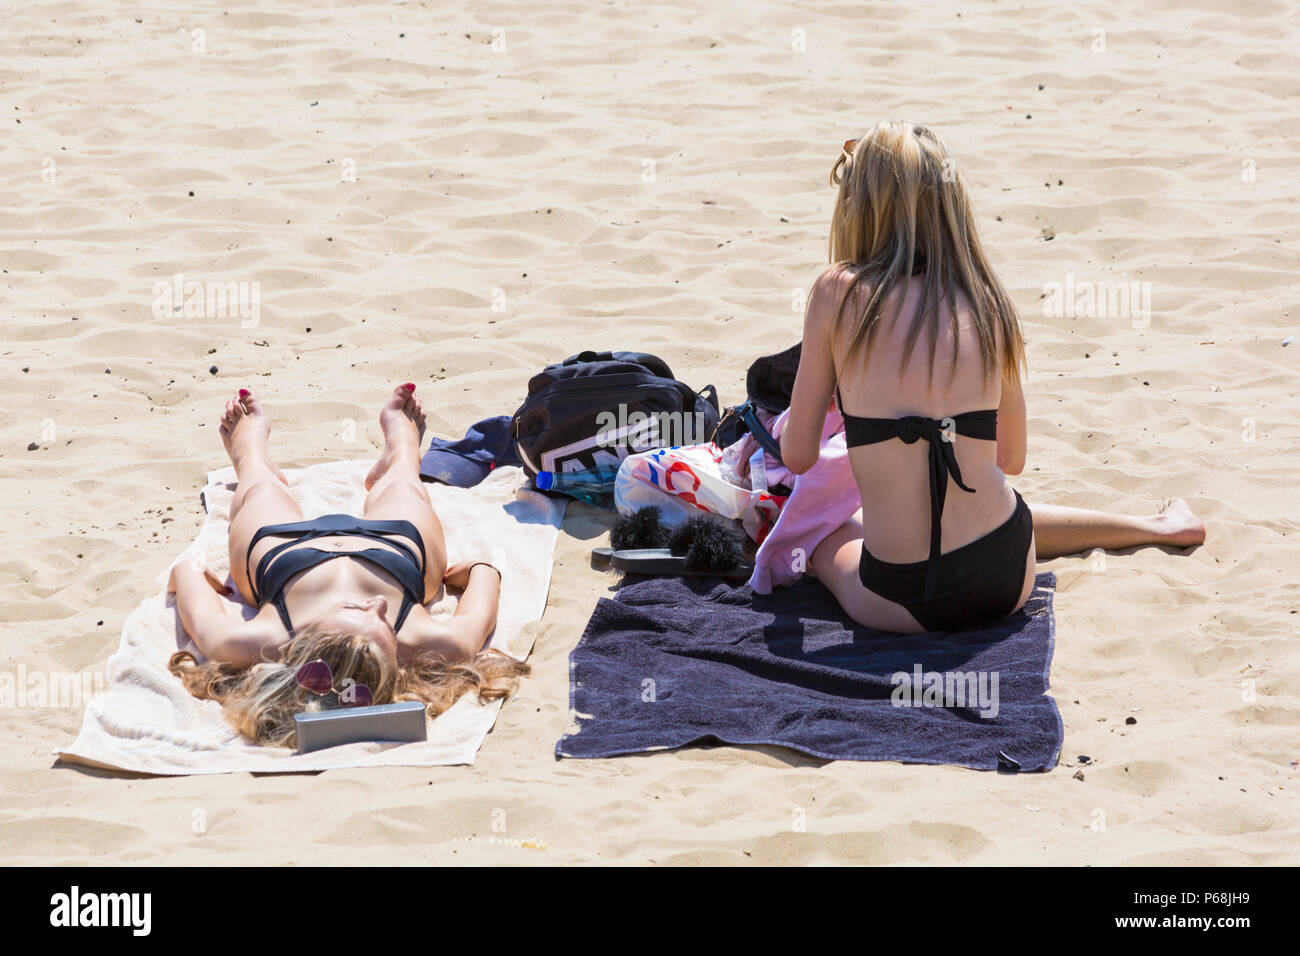 Bournemouth, Dorset, UK. 29th June, 2018. UK weather: sunseekers head to the beaches at Bournemouth on another hot sunny day with unbroken blue skies and sunshine. A slight breeze makes the heat more bearable. sunbathers on the beach. Credit: Carolyn Jenkins/Alamy Live News Stock Photo